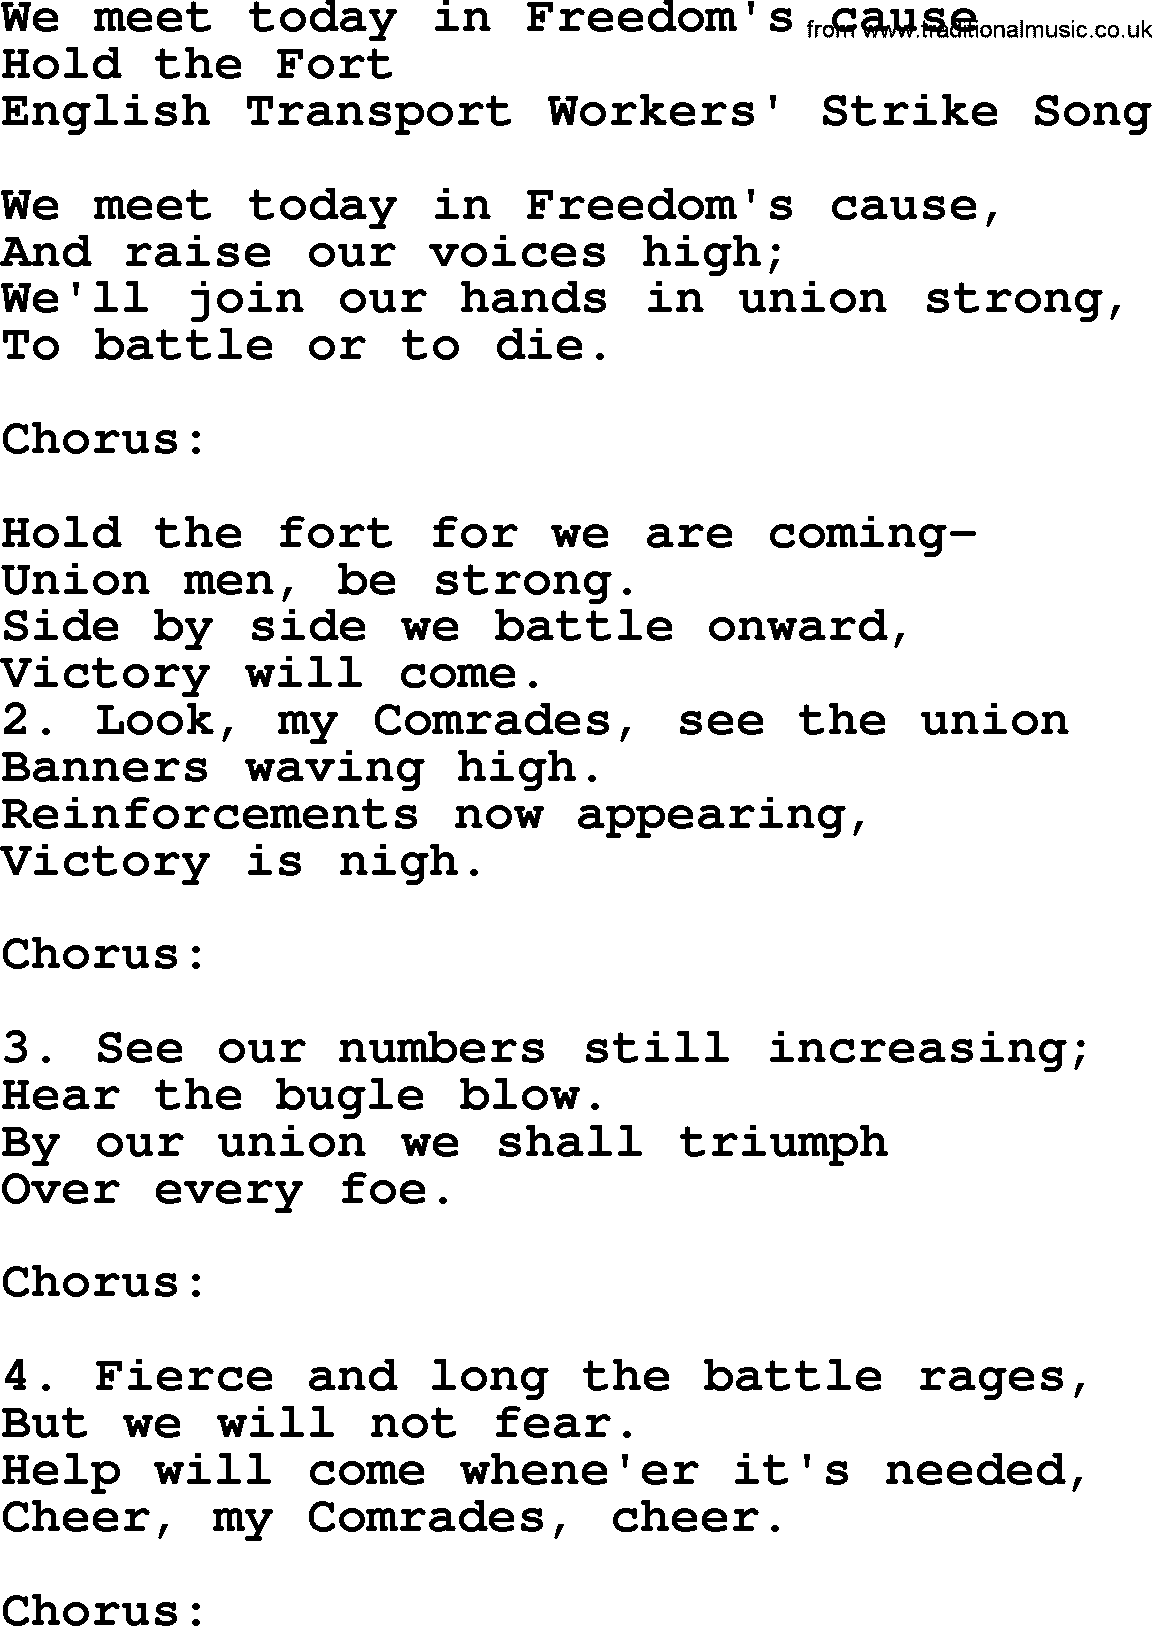 Political, Solidarity, Workers or Union song: We Meet Today In Freedoms Cause, lyrics